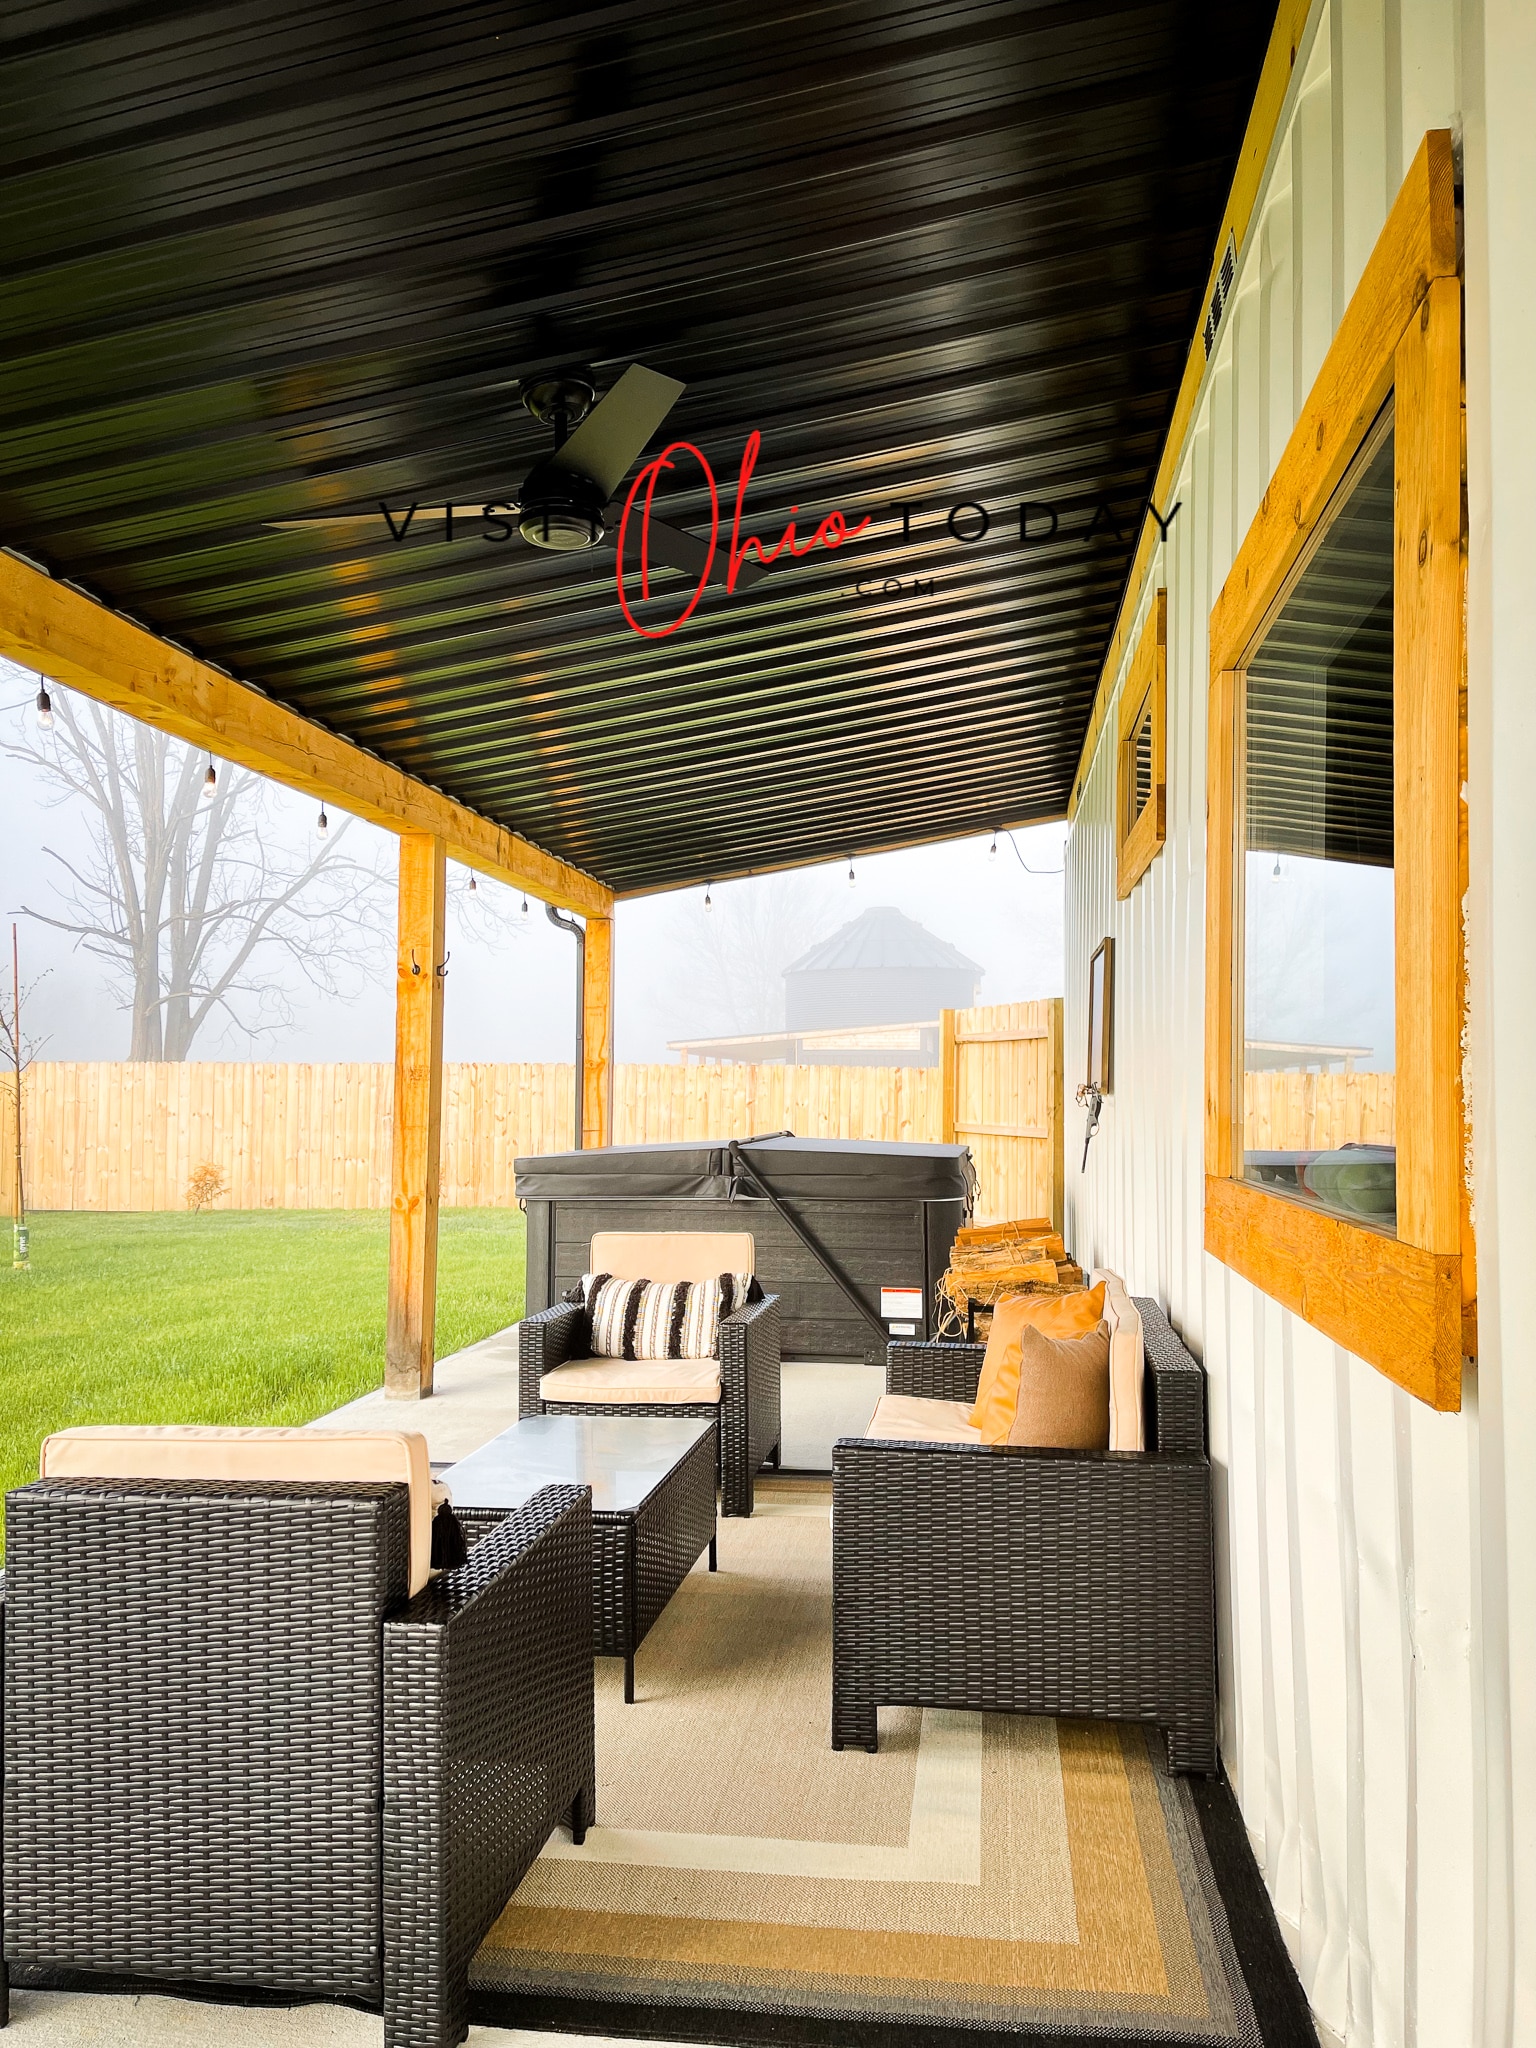 back porch of tiny house with black roof and black patio furuinture